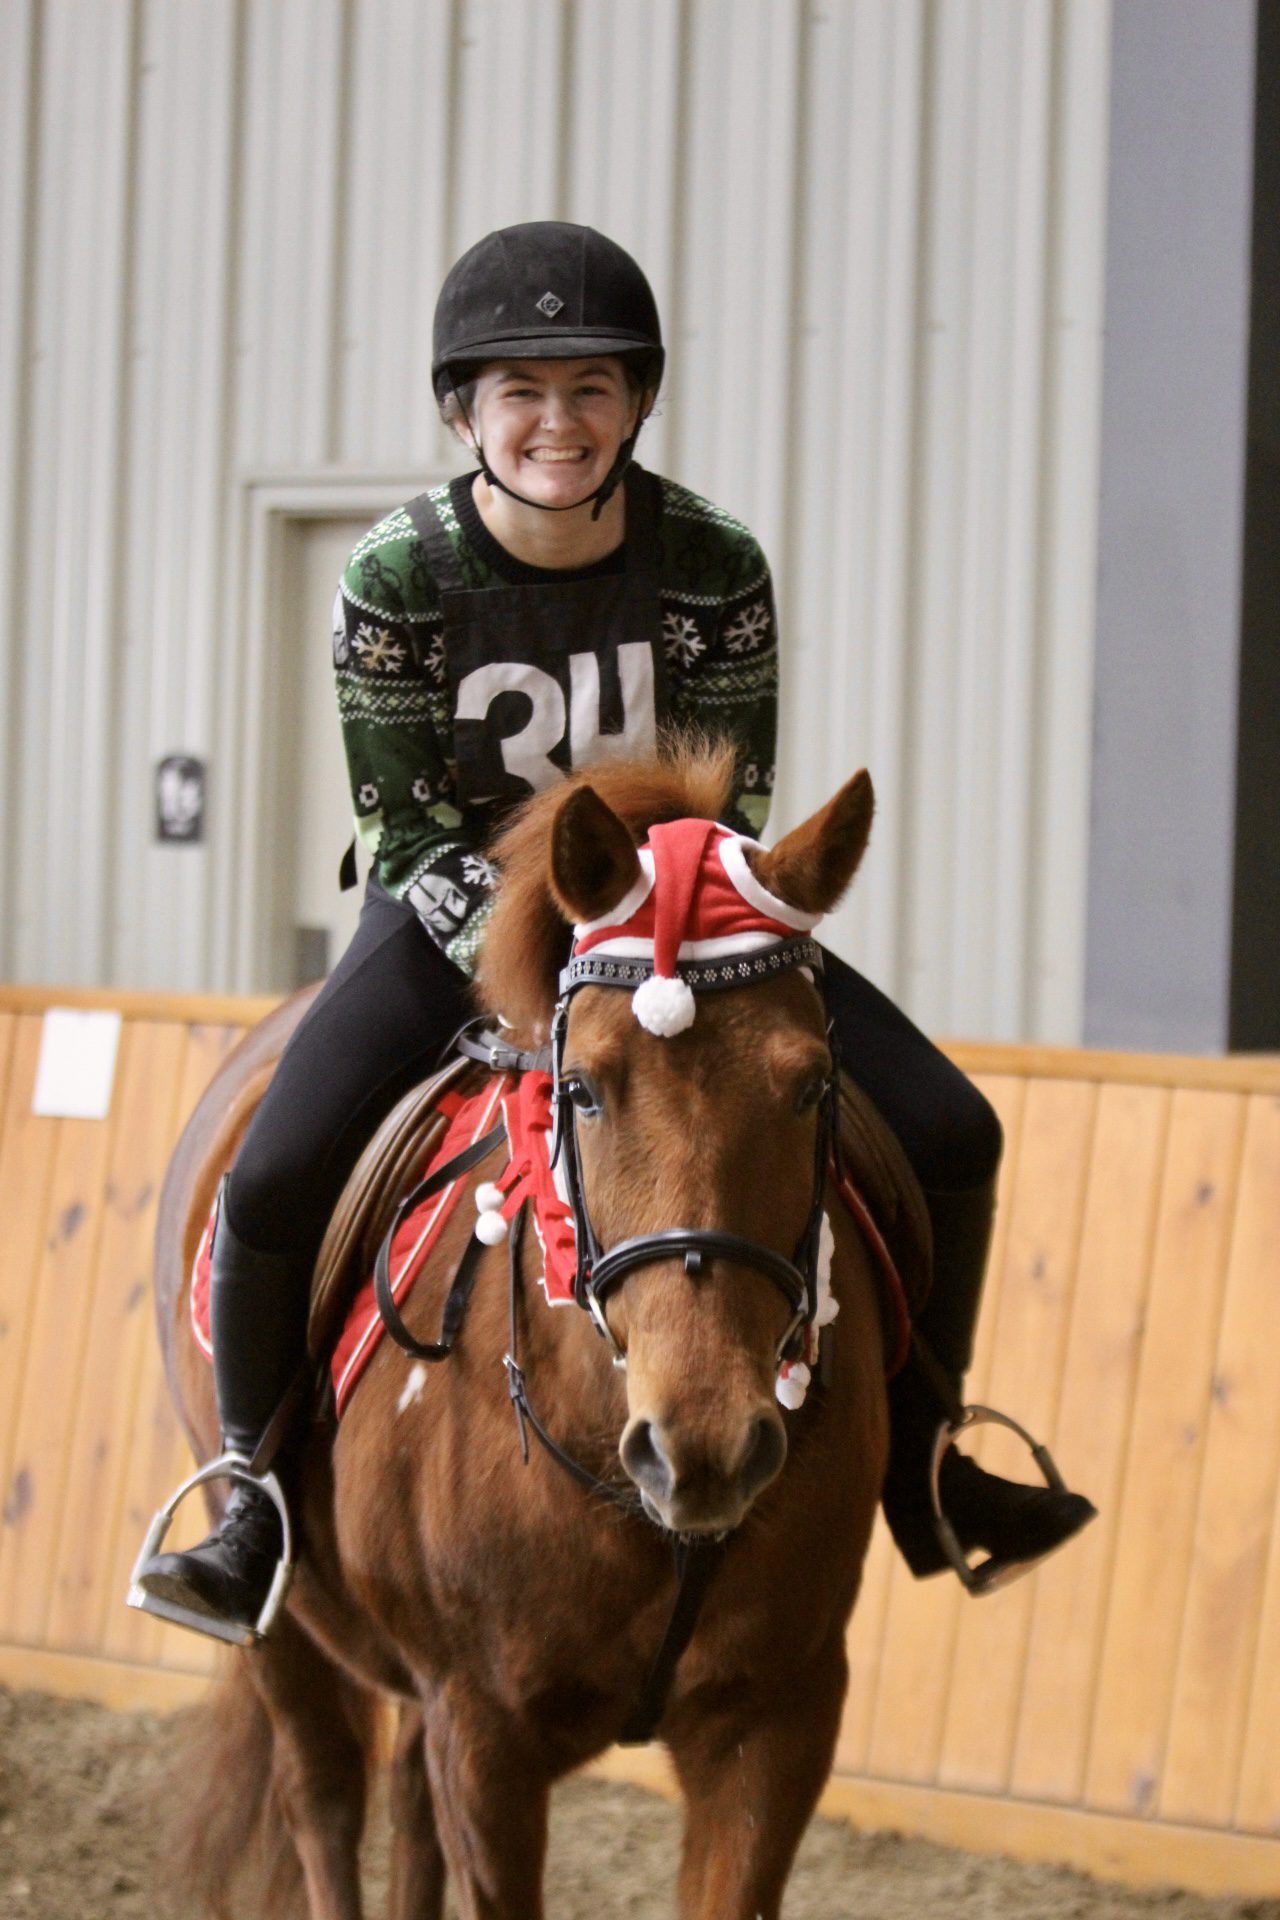 Student smiling in Christmas attire on lesson pony Rowan